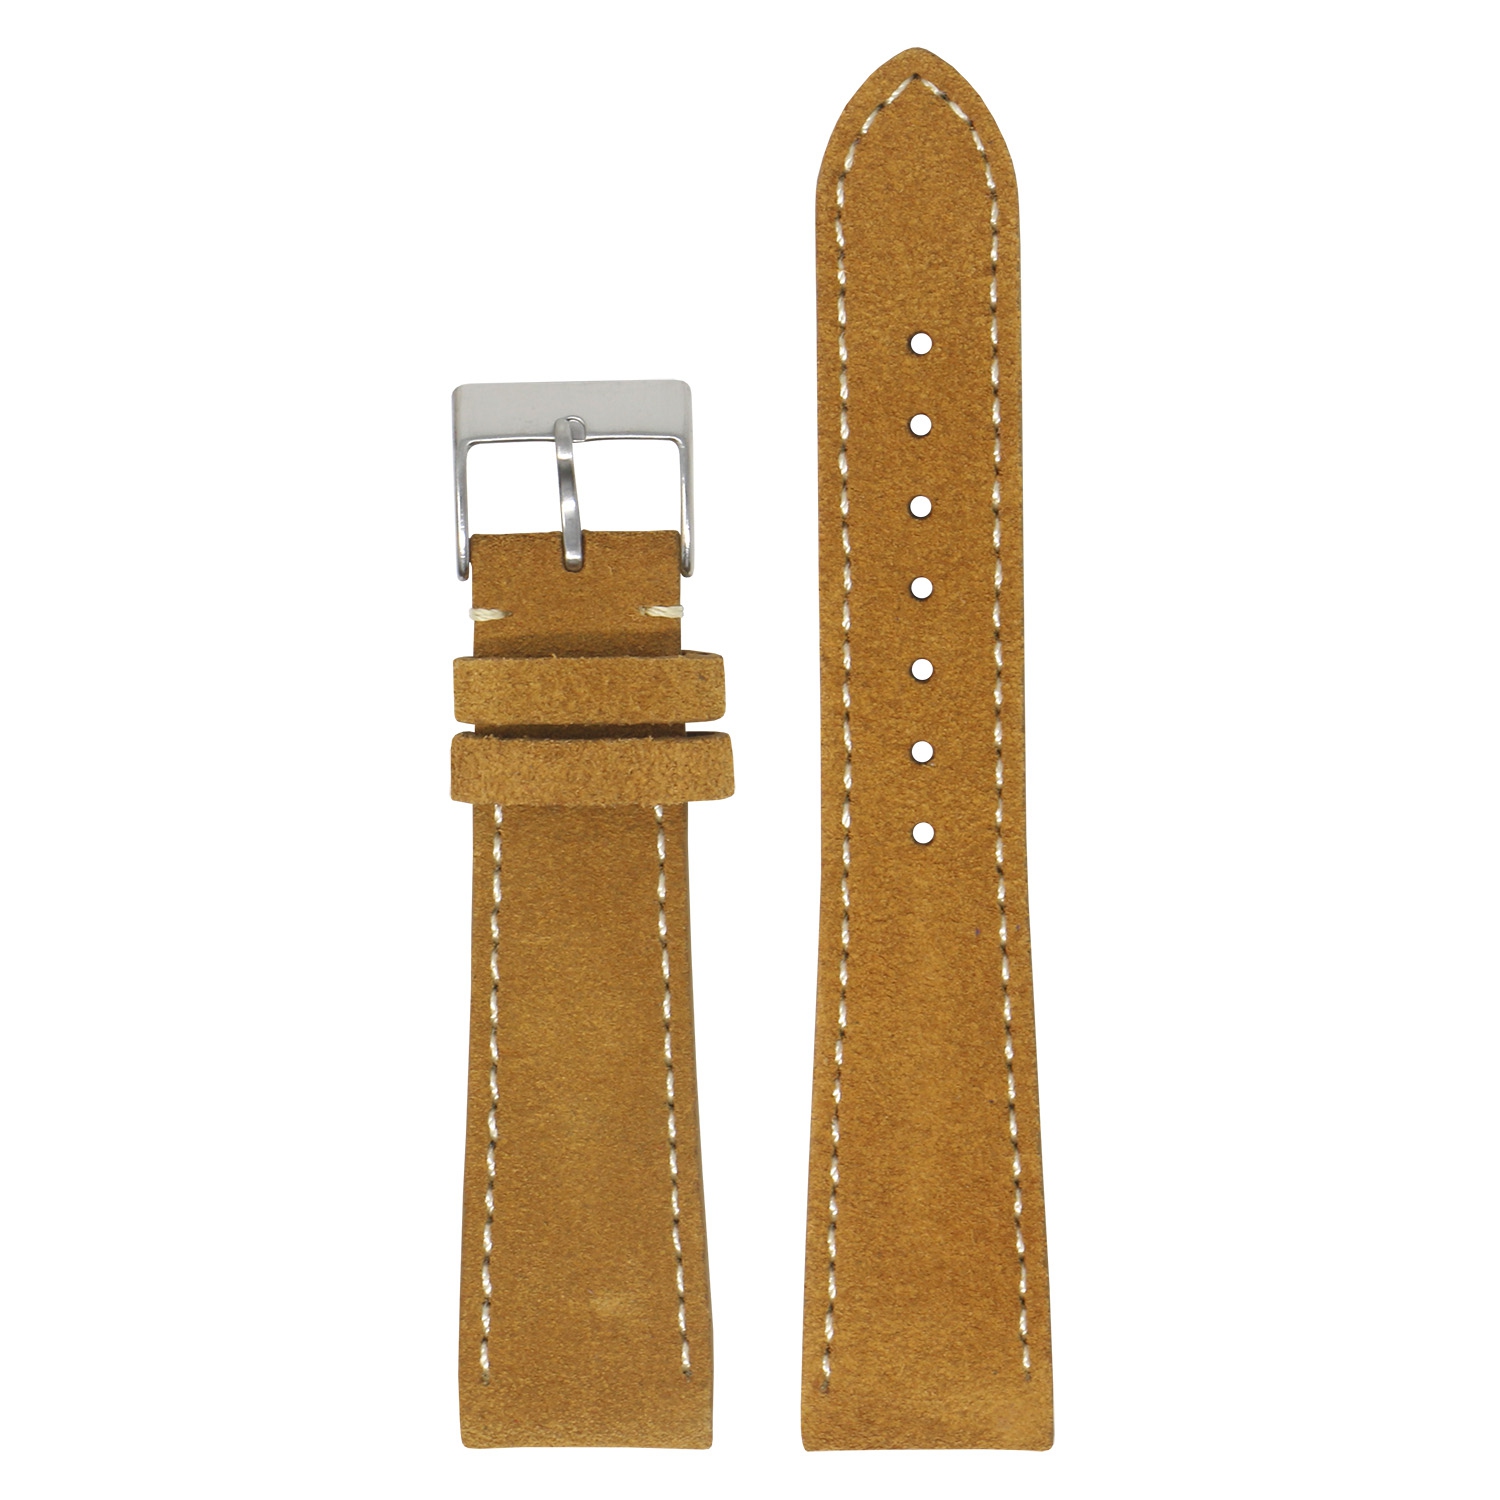 StrapsCo Classic Suede Watch Band Strap (Short, Standard, Long) for Fitbit Charge 4 & Charge 3 - Standard - Tan